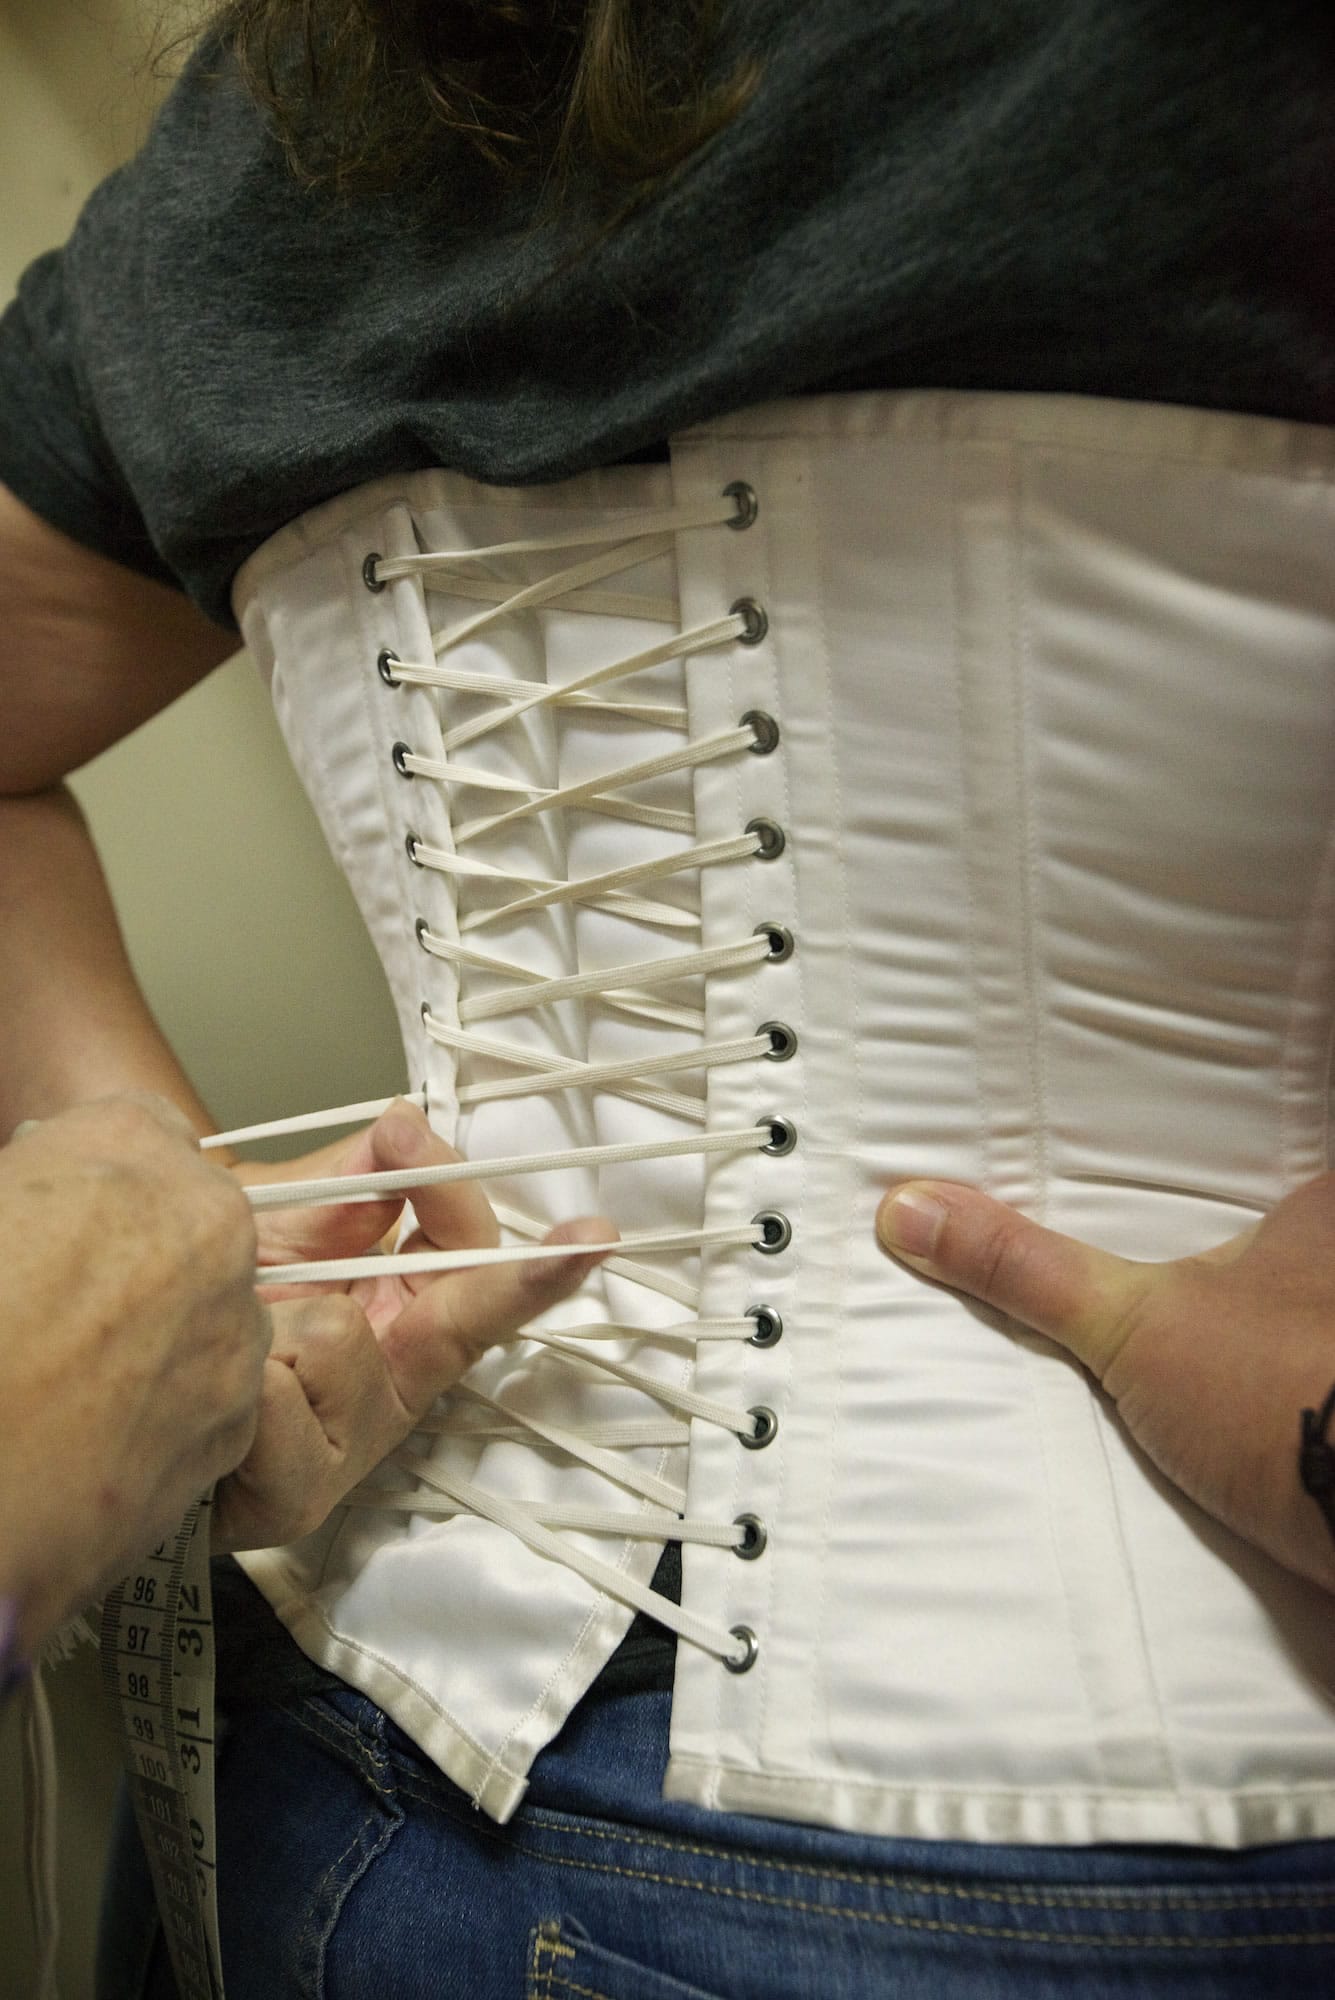 Eileen Trestain, head of the costume department at the Fort Vancouver National Historic Site, tightens a corset in preparation for a dress fitting for Heidi Pierson, a National Park Service cultural resource specialist, Wednesday.